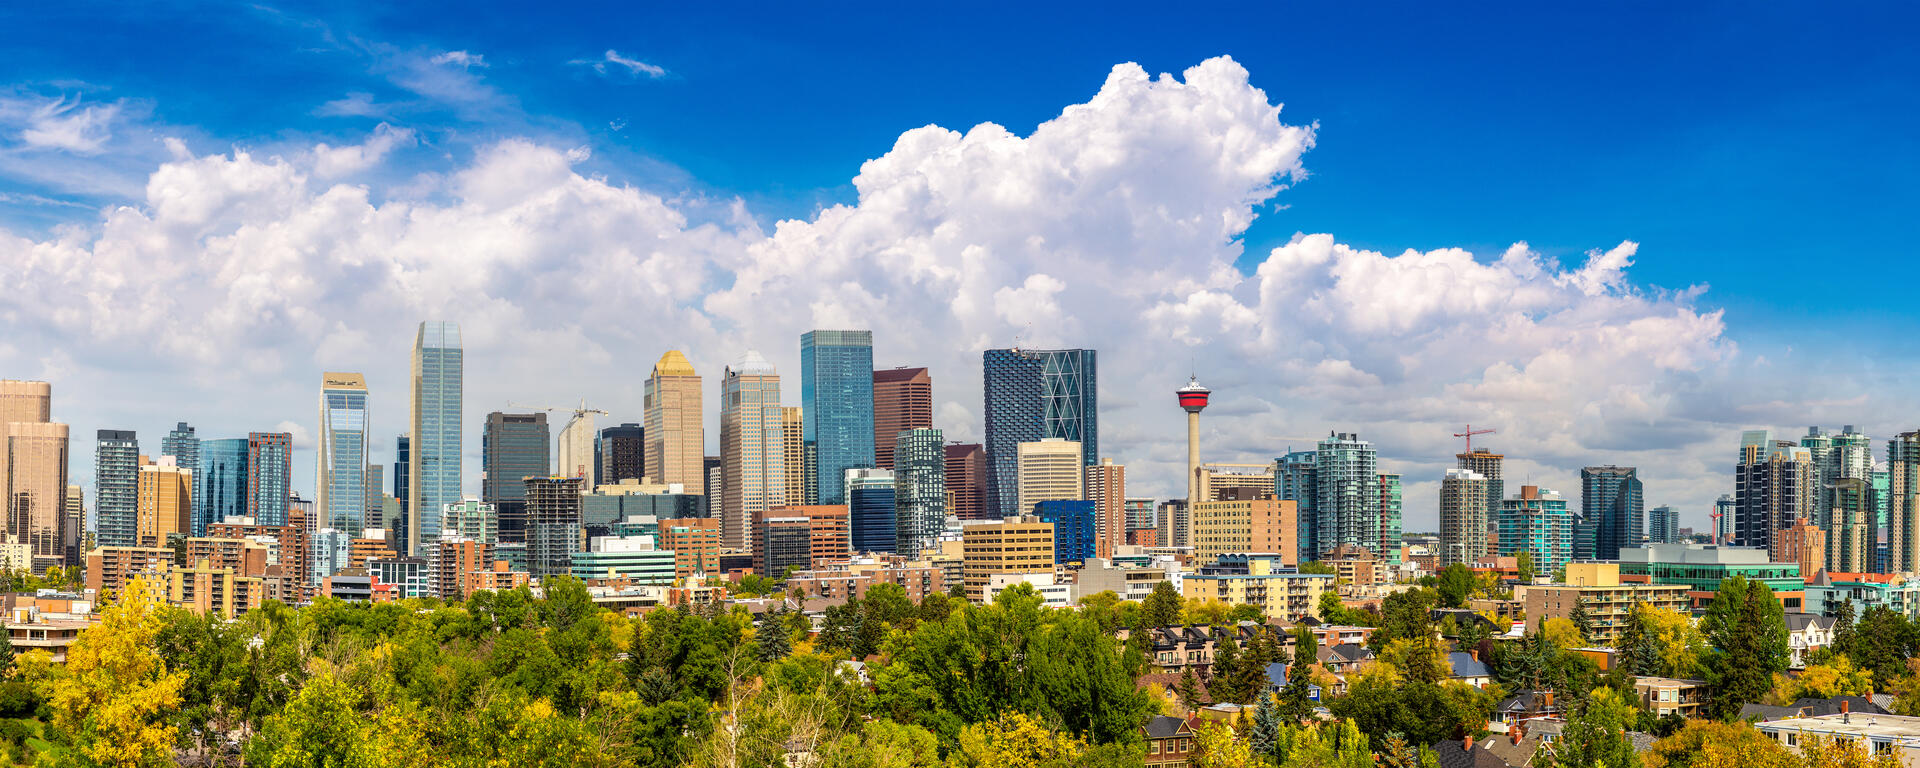 A landscape portrait of Downtown Calgary. There is greenery at the lower border, and skyscrapers across the entire screen